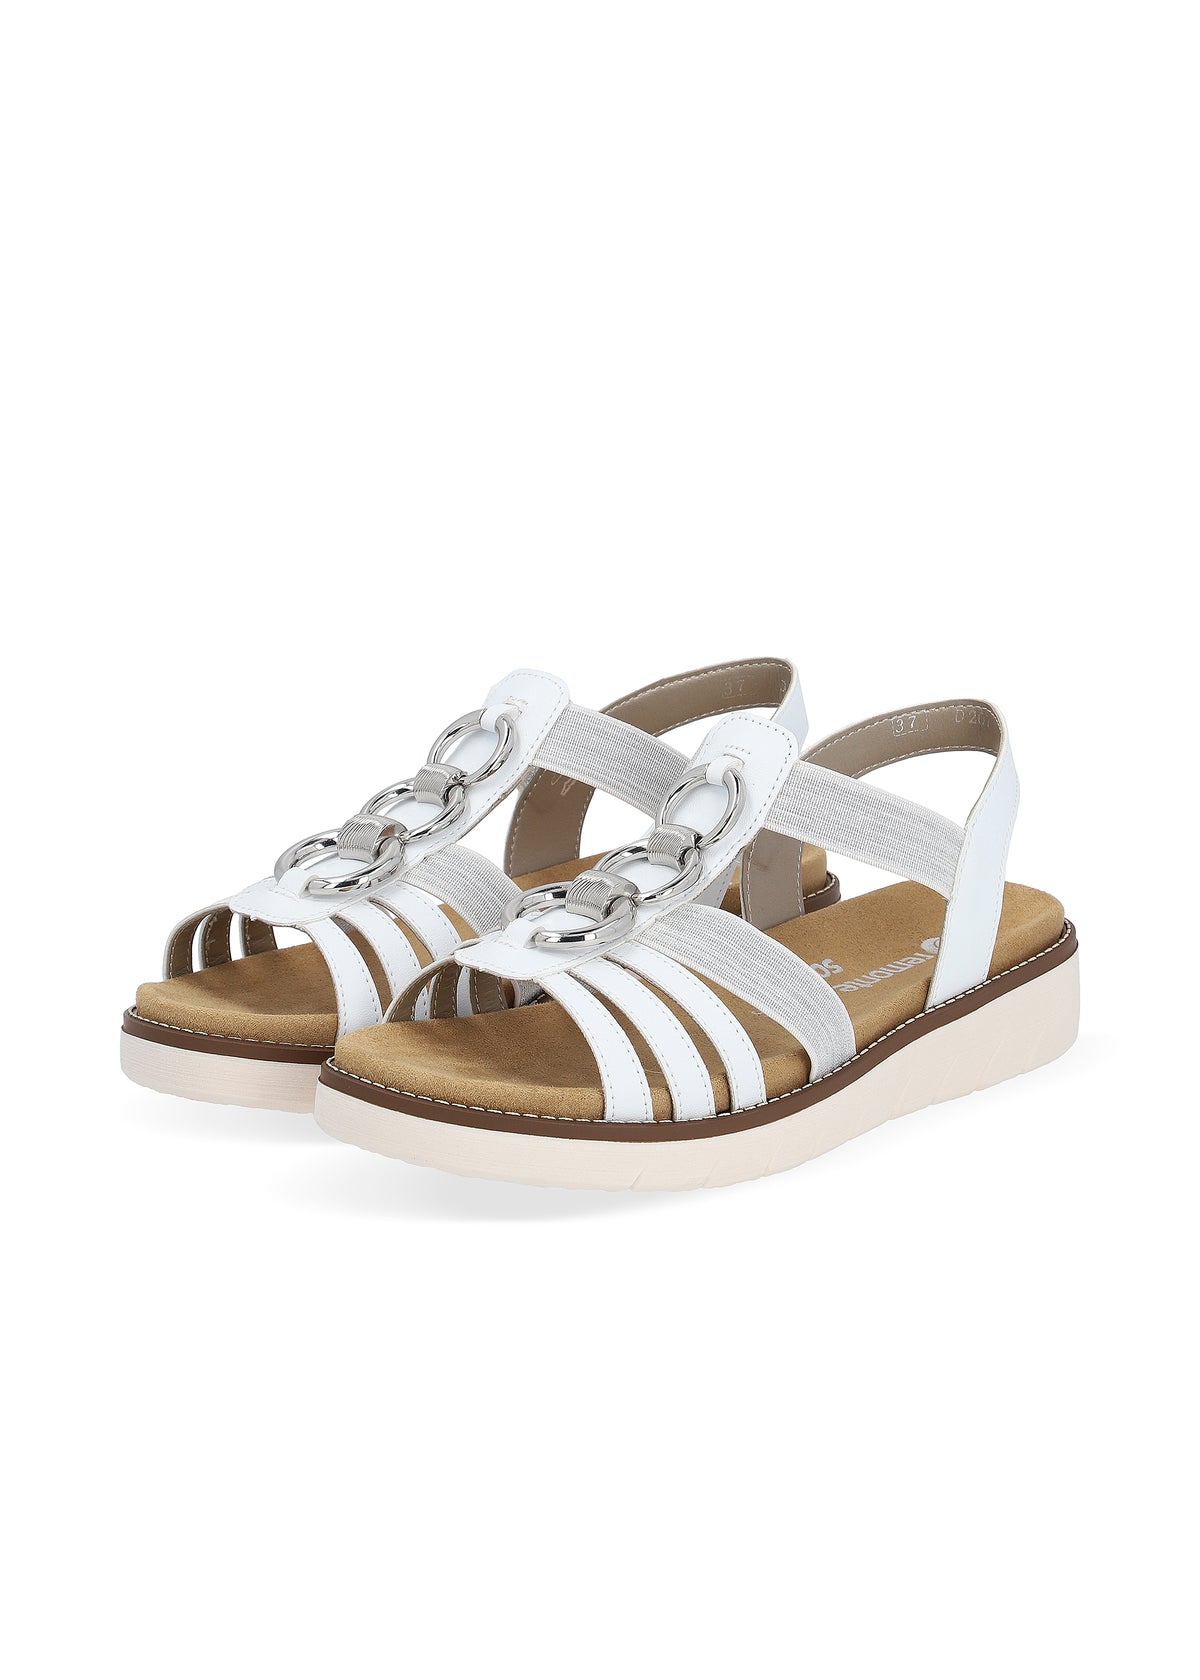 Sandals with elastic straps - white, silver decorations